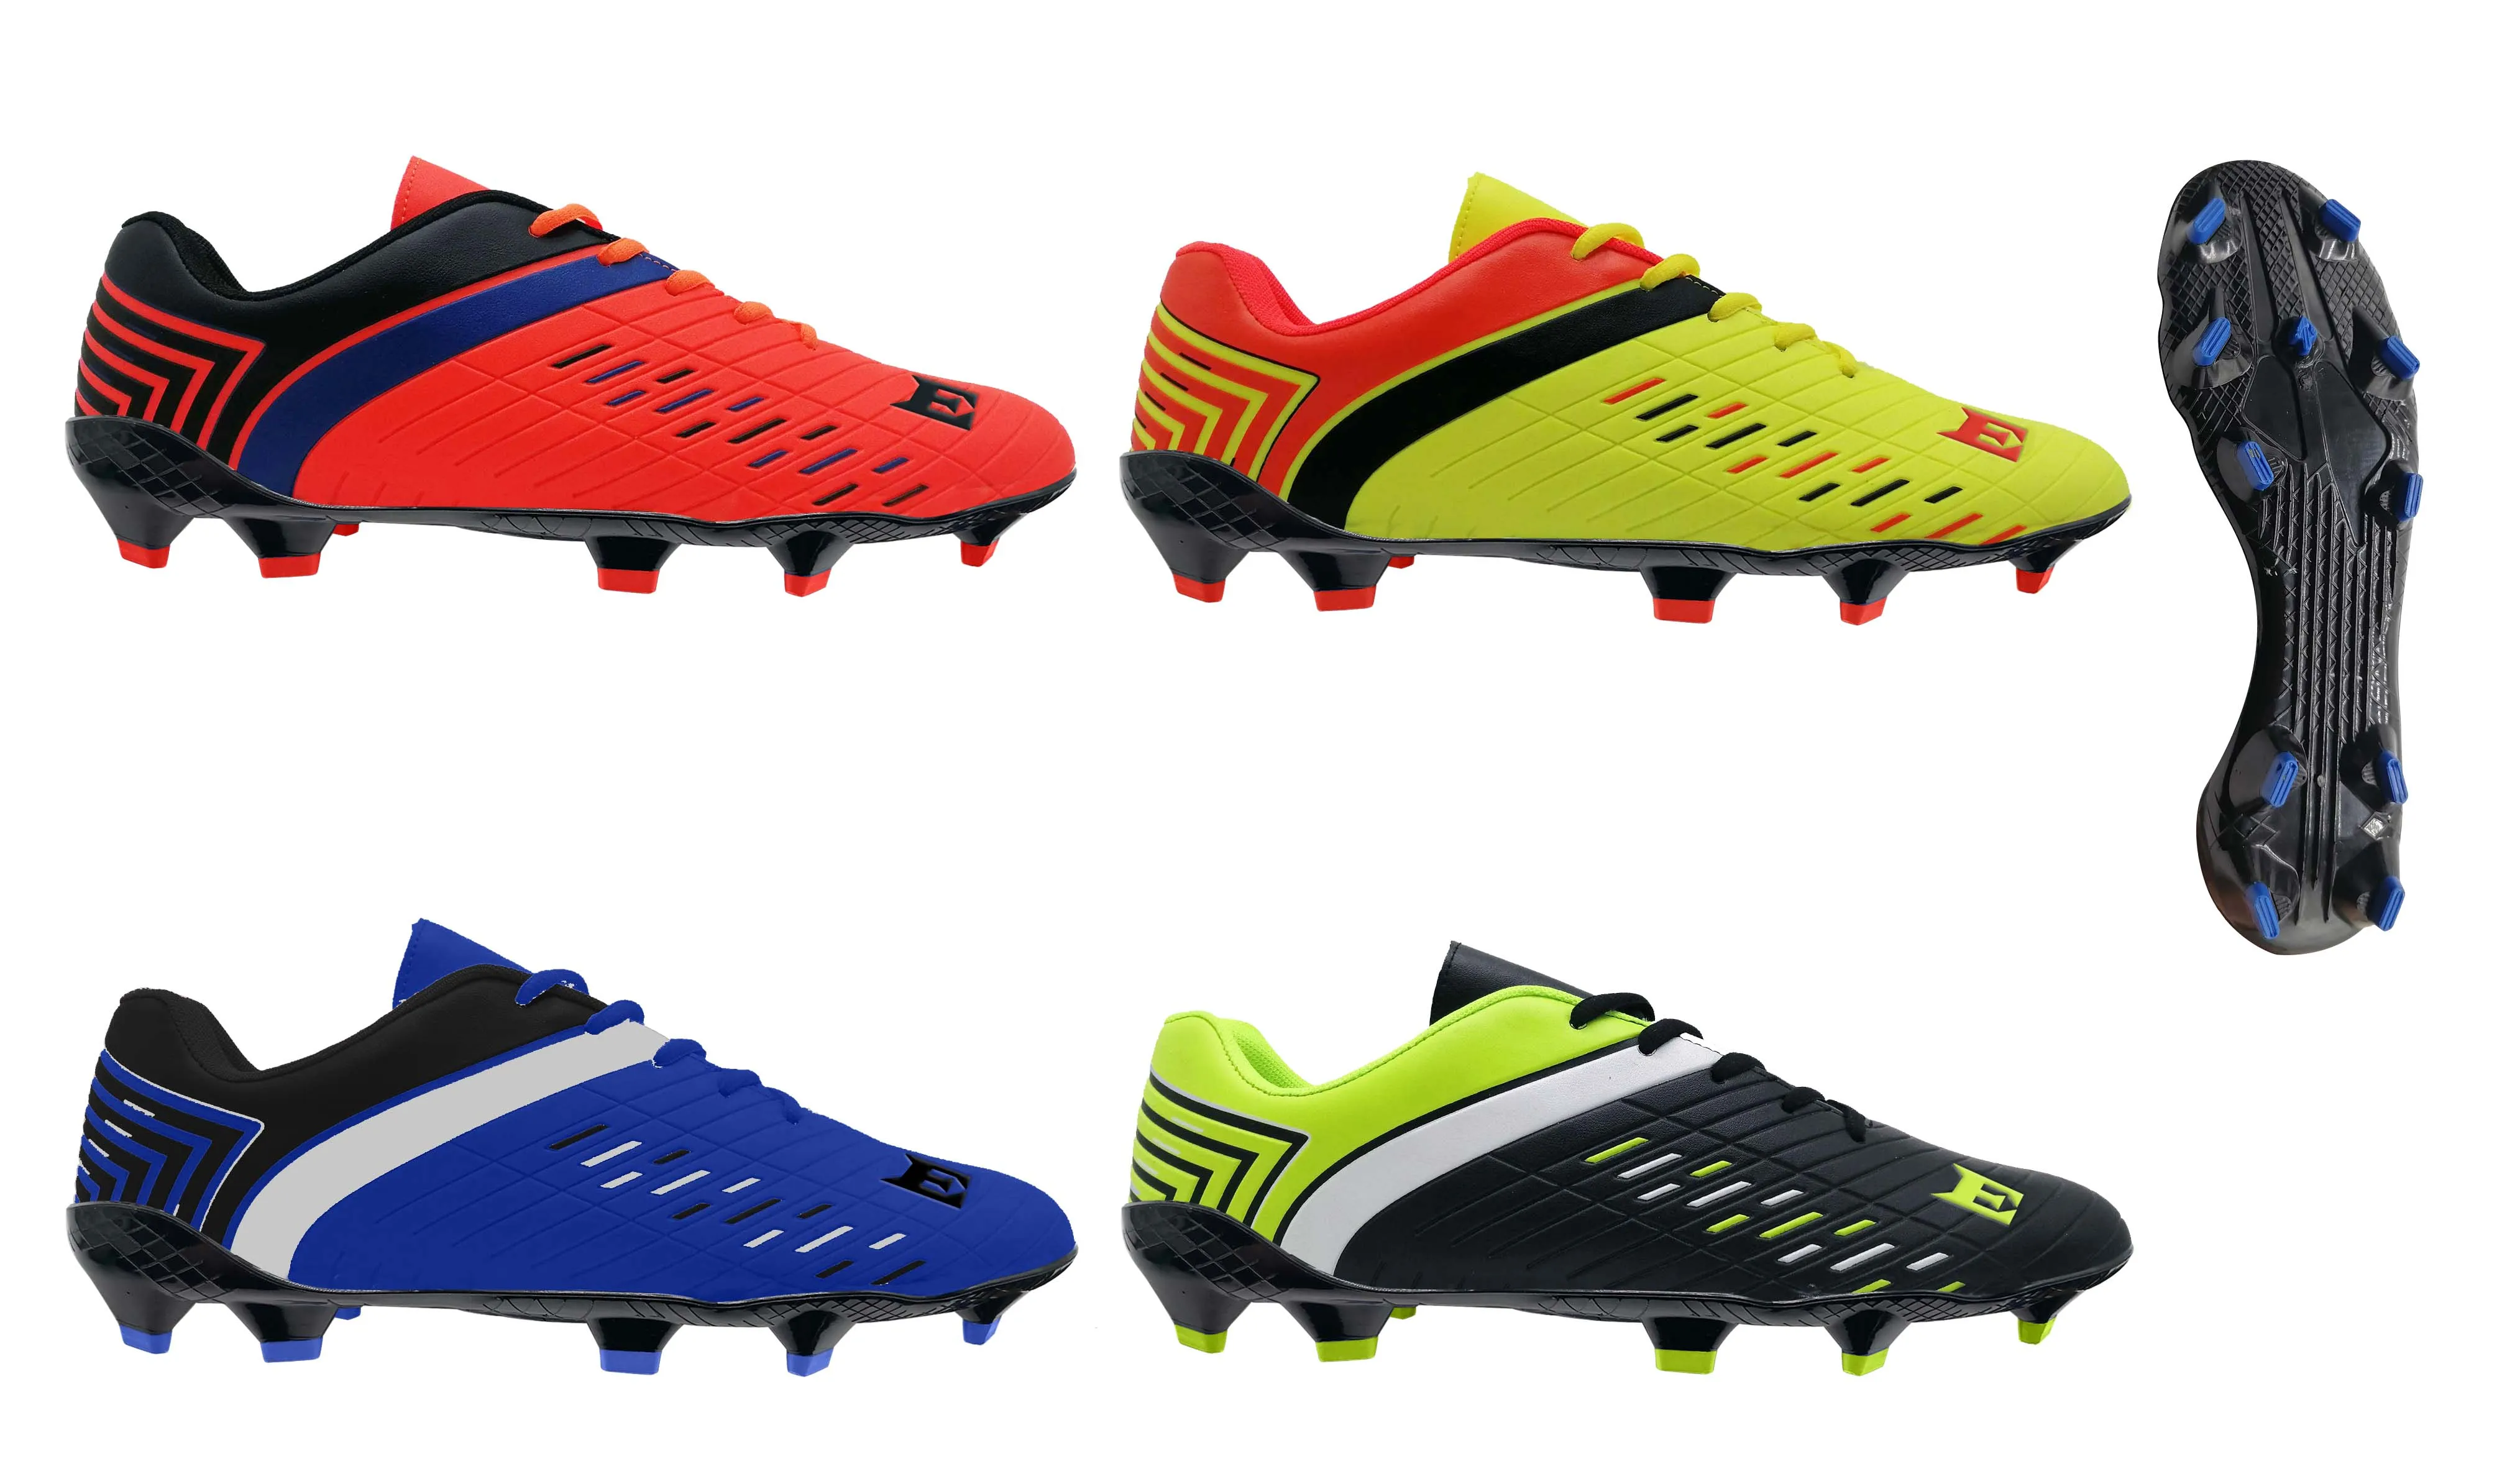 Hot-selling Factory Competitive Custom Football Boots Spike Training Shoes Top Quality Football Boots Athletic Shoes Soccer